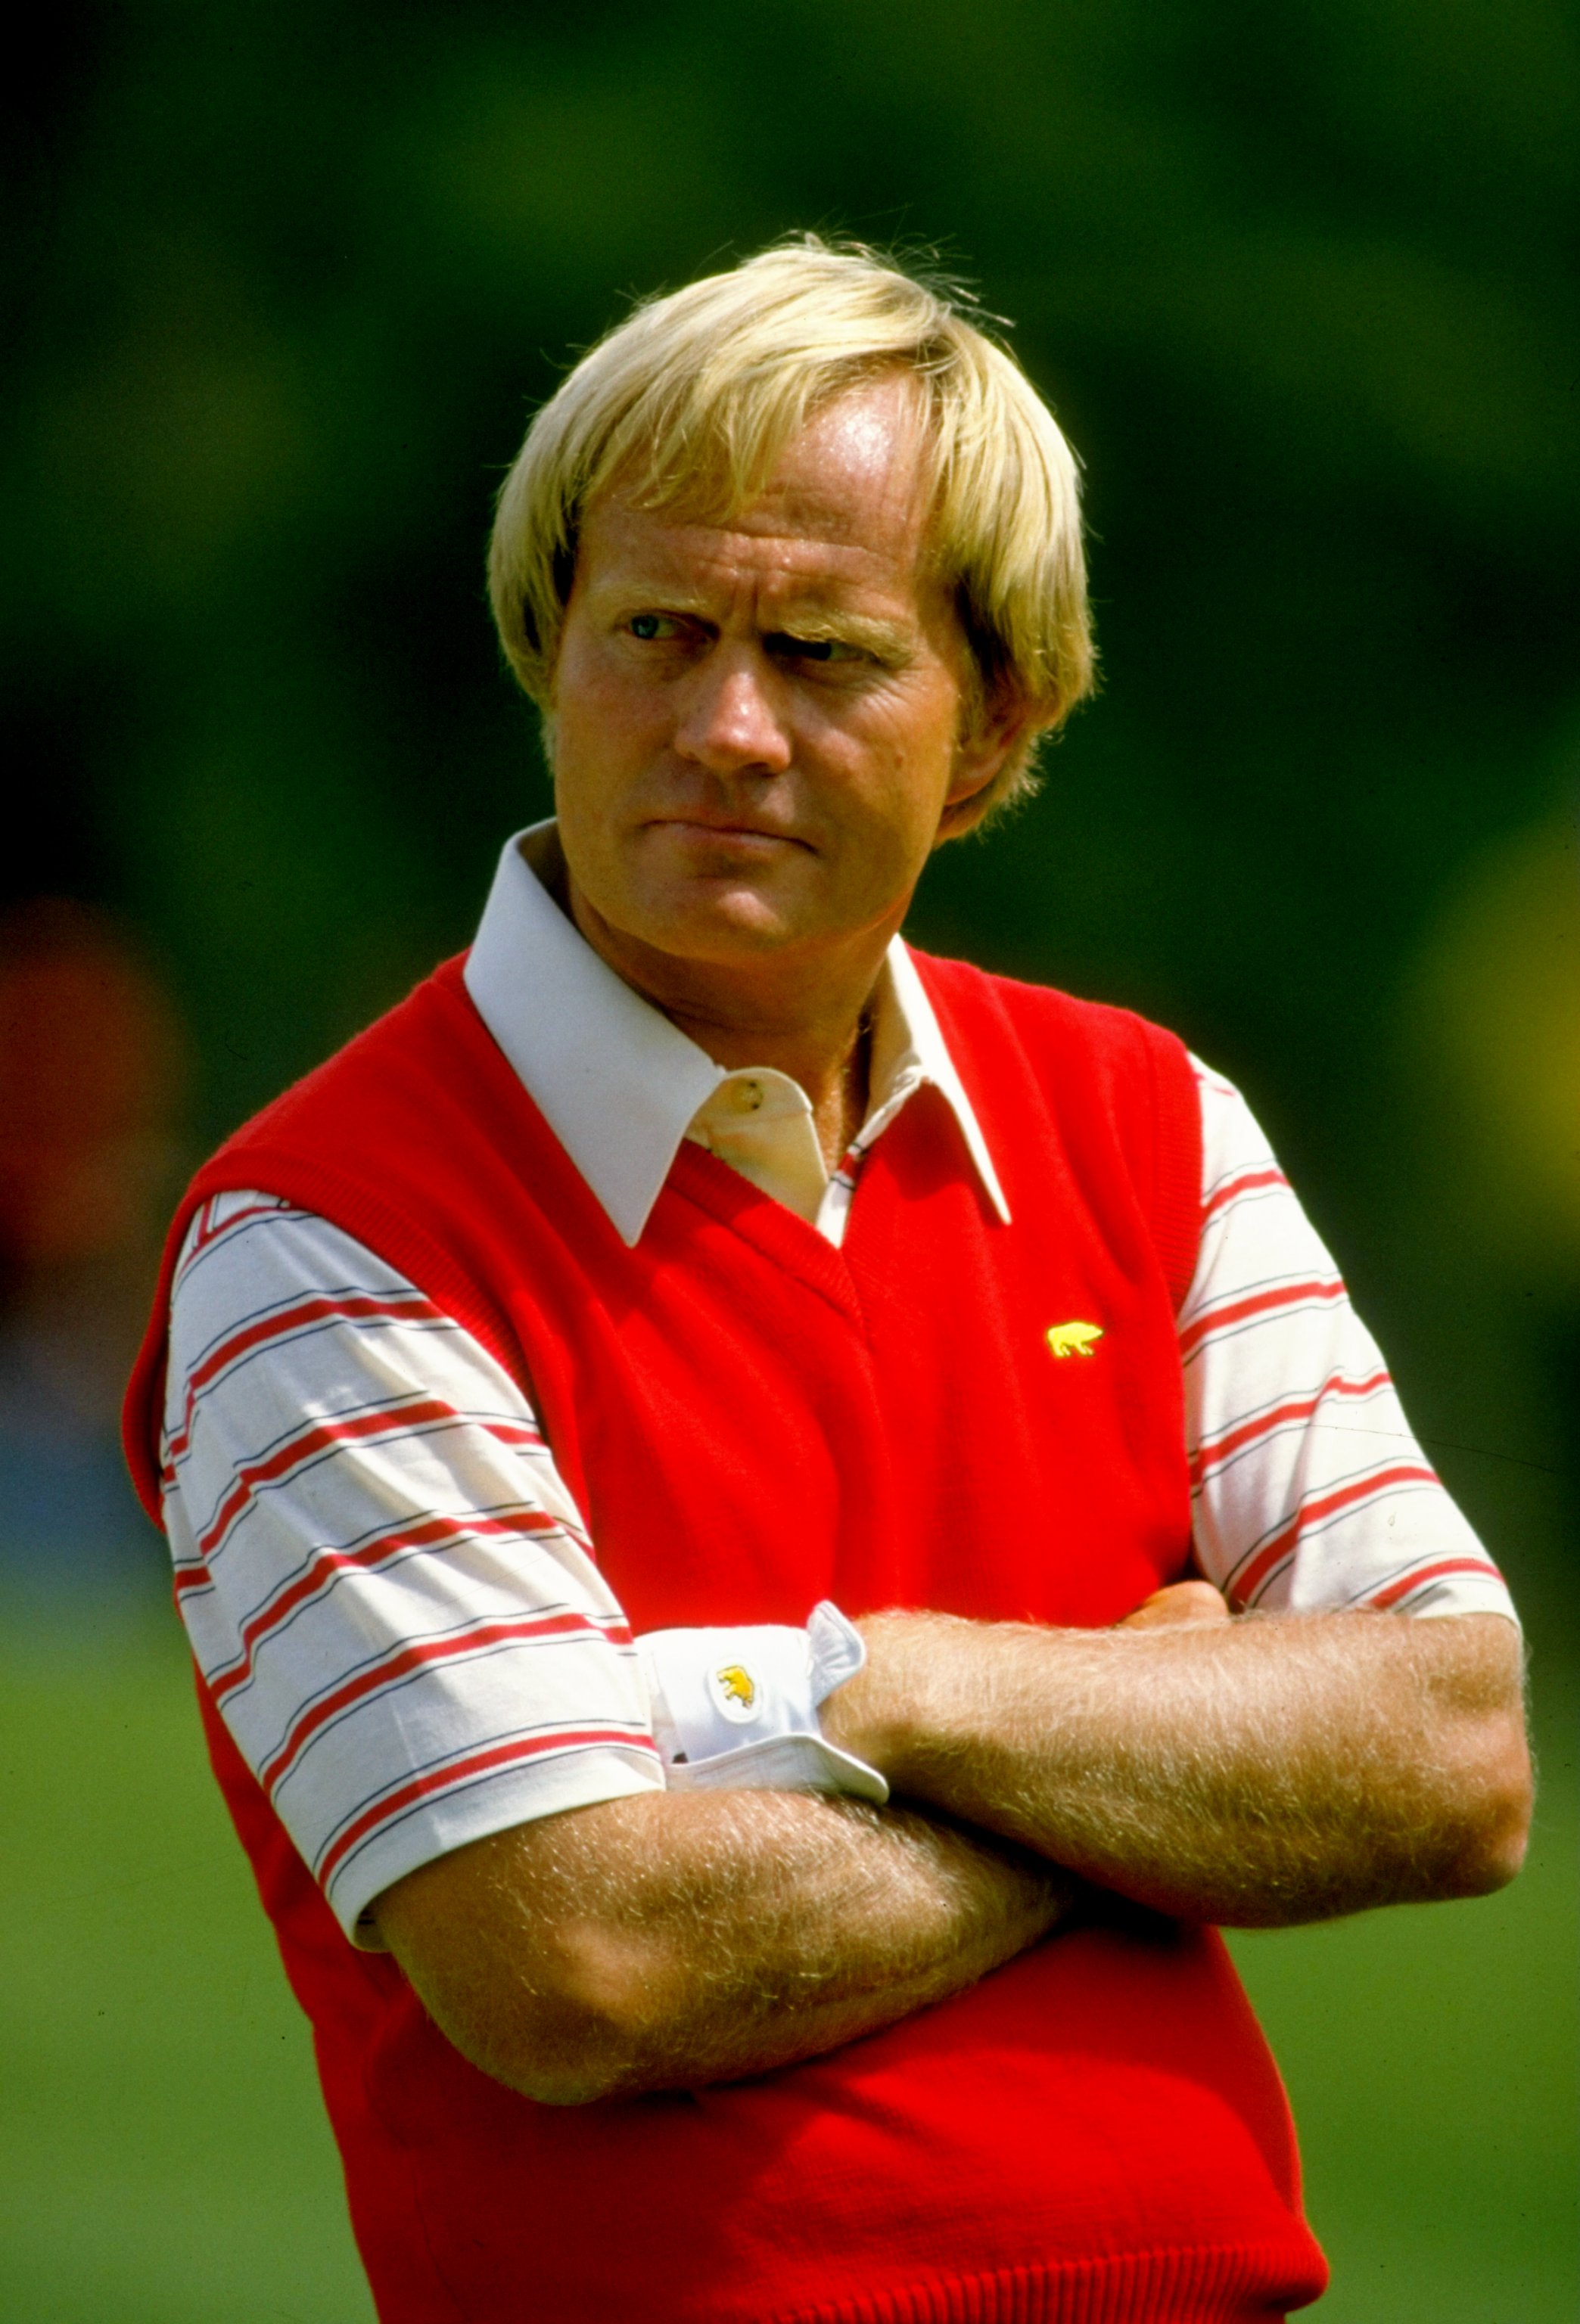 1986:  Portrait of Jack Nicklaus of the USA during the US Masters at the Augusta National Golf Club in Georgia, USA. Nicklaus won the event with a score of 279. \ Mandatory Credit: David  Cannon/Allsport